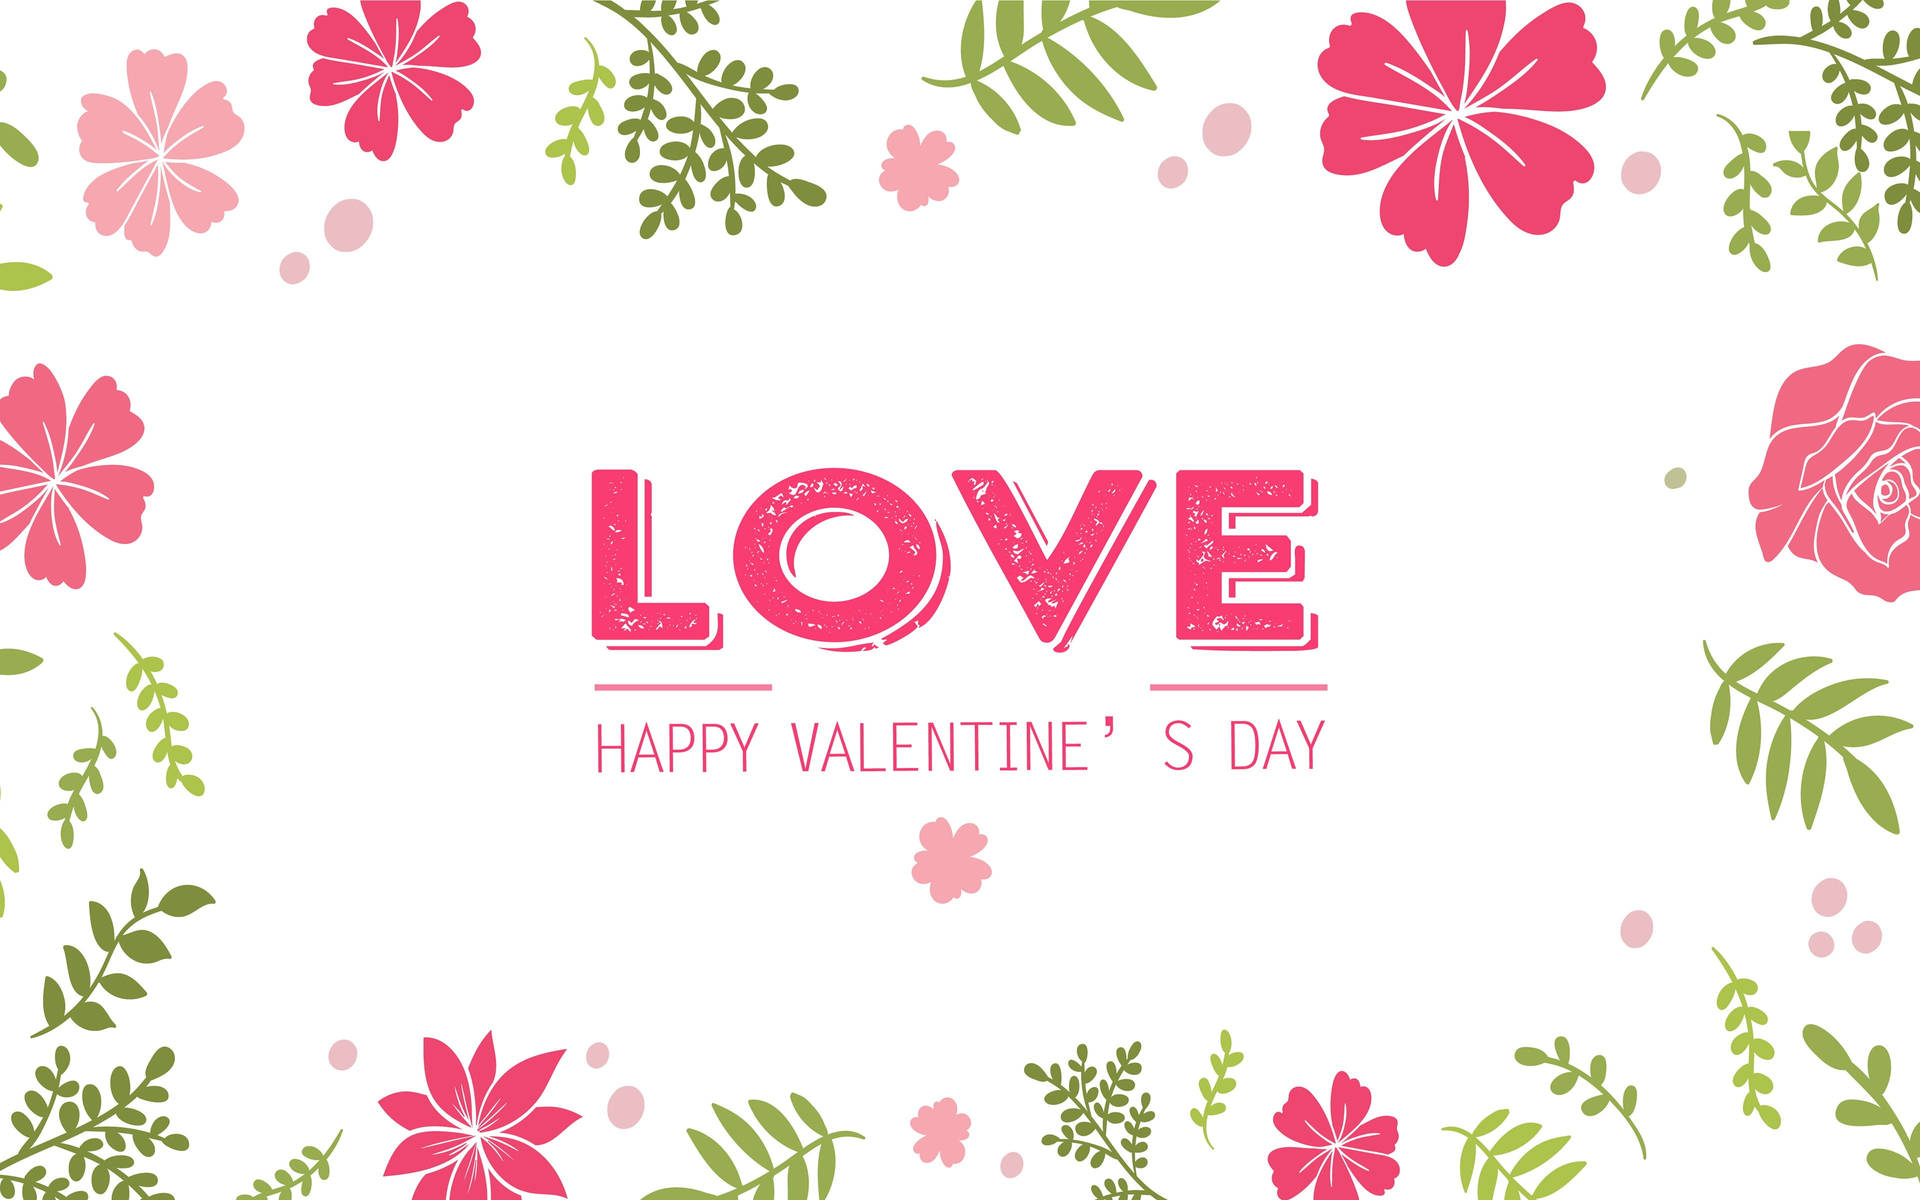 Flowers And Plants Happy Valentine’s Day Wallpaper